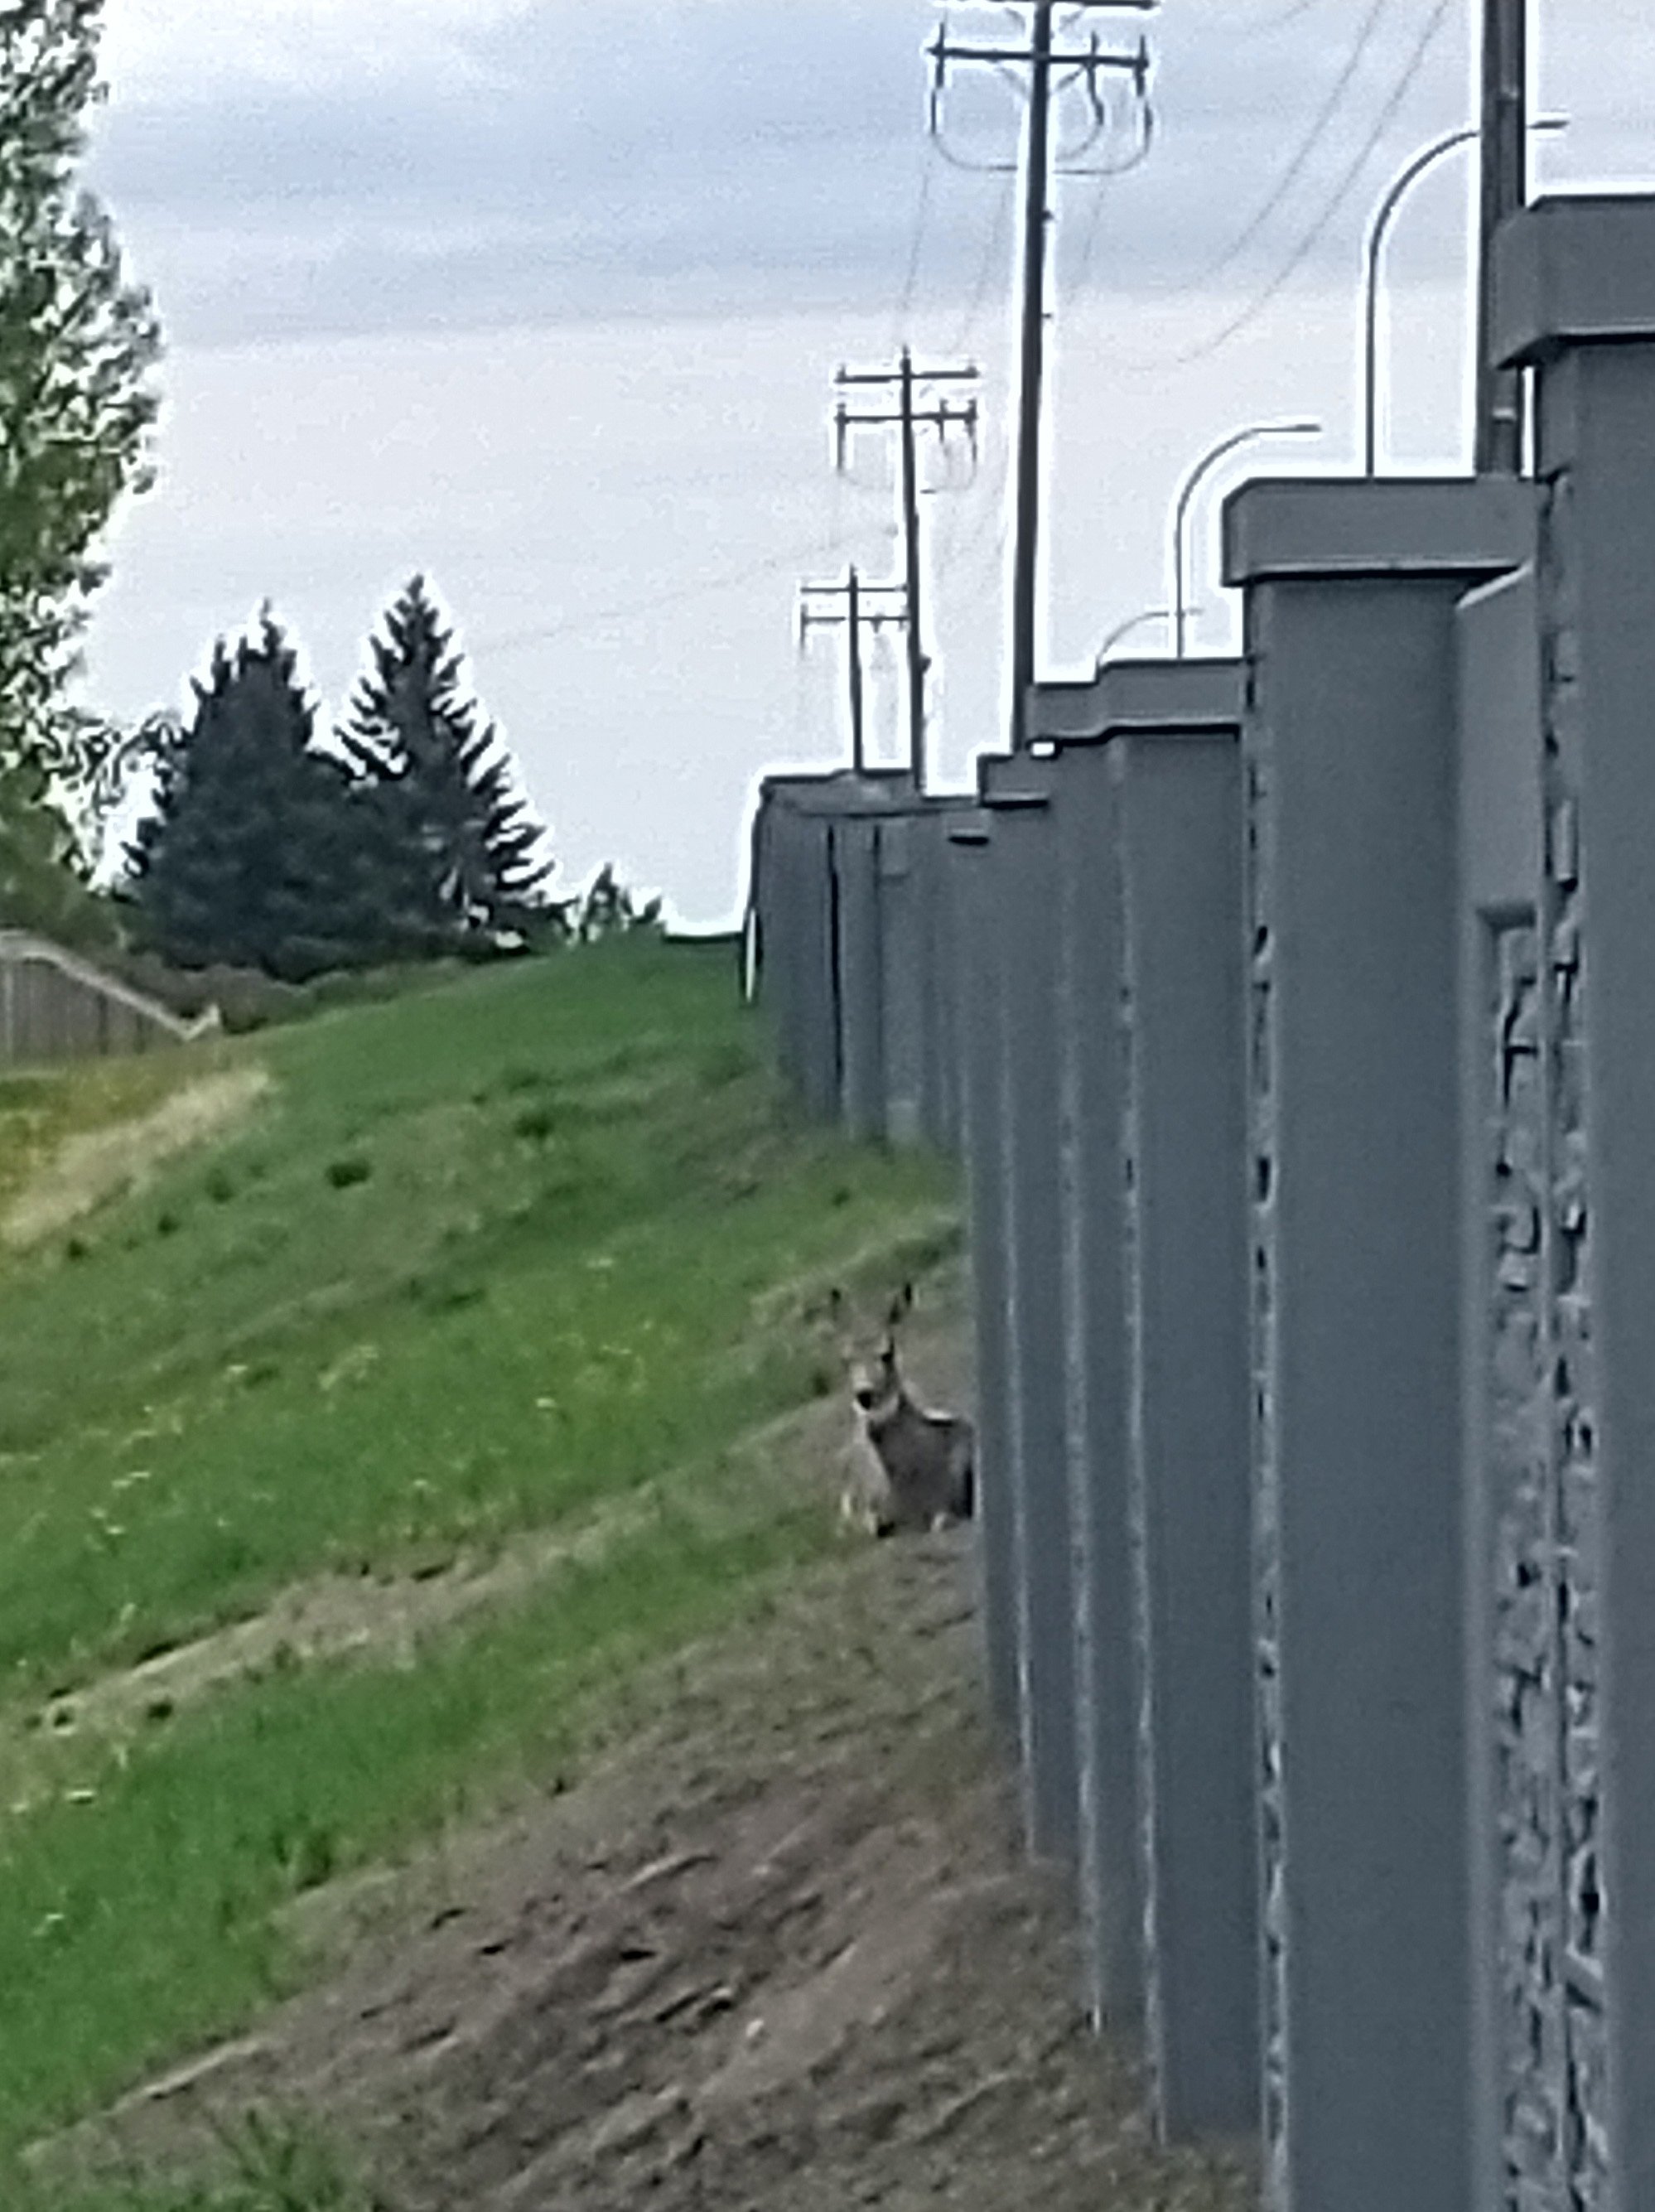 Saw a deer just hiding, waiting for night time to leap in front of a car.